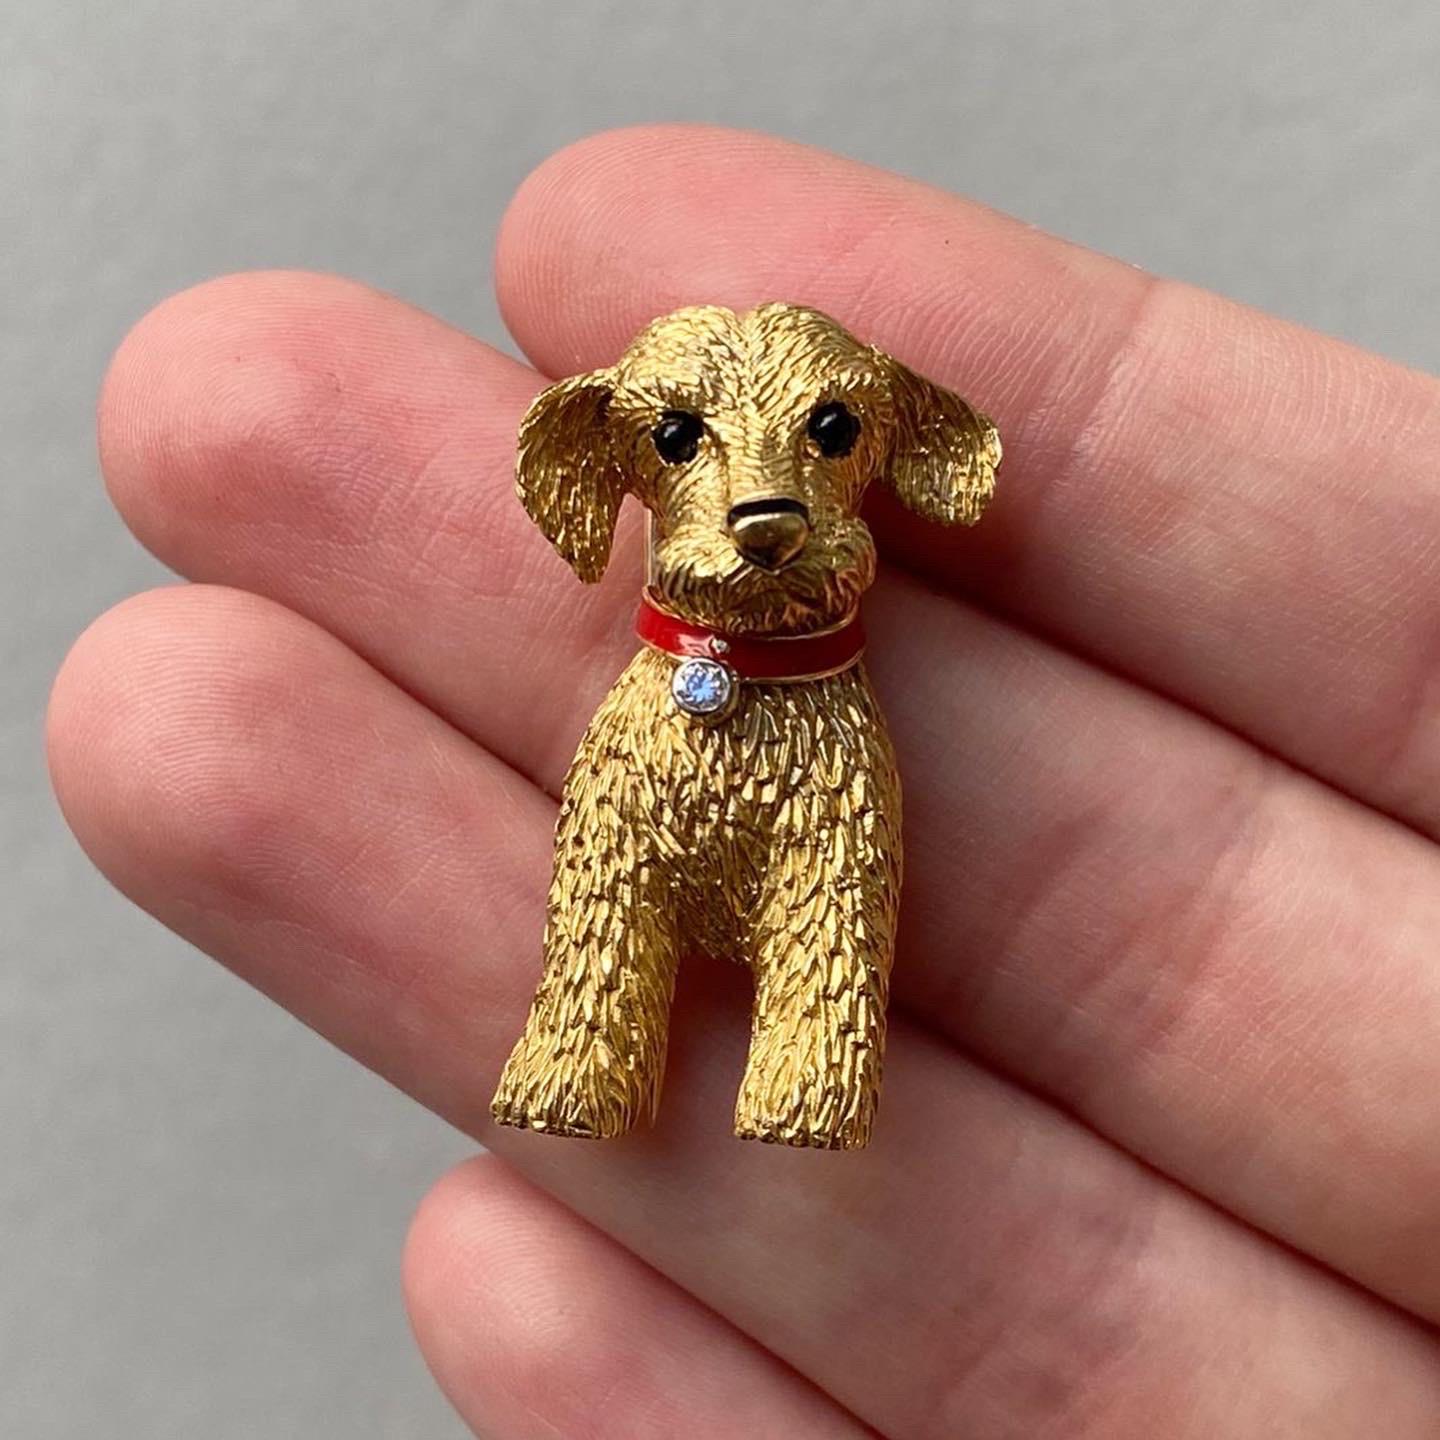 A super cute 18 carat yellow gold Cartier puppy brooch with a 
red enamel collar set with a small diamond (app. 0.04 carat). The eyes are 
made of onyx. Signed Cartier Paris and numbered 018187. Hallmark of the 
goldsmith. In the original Cartier